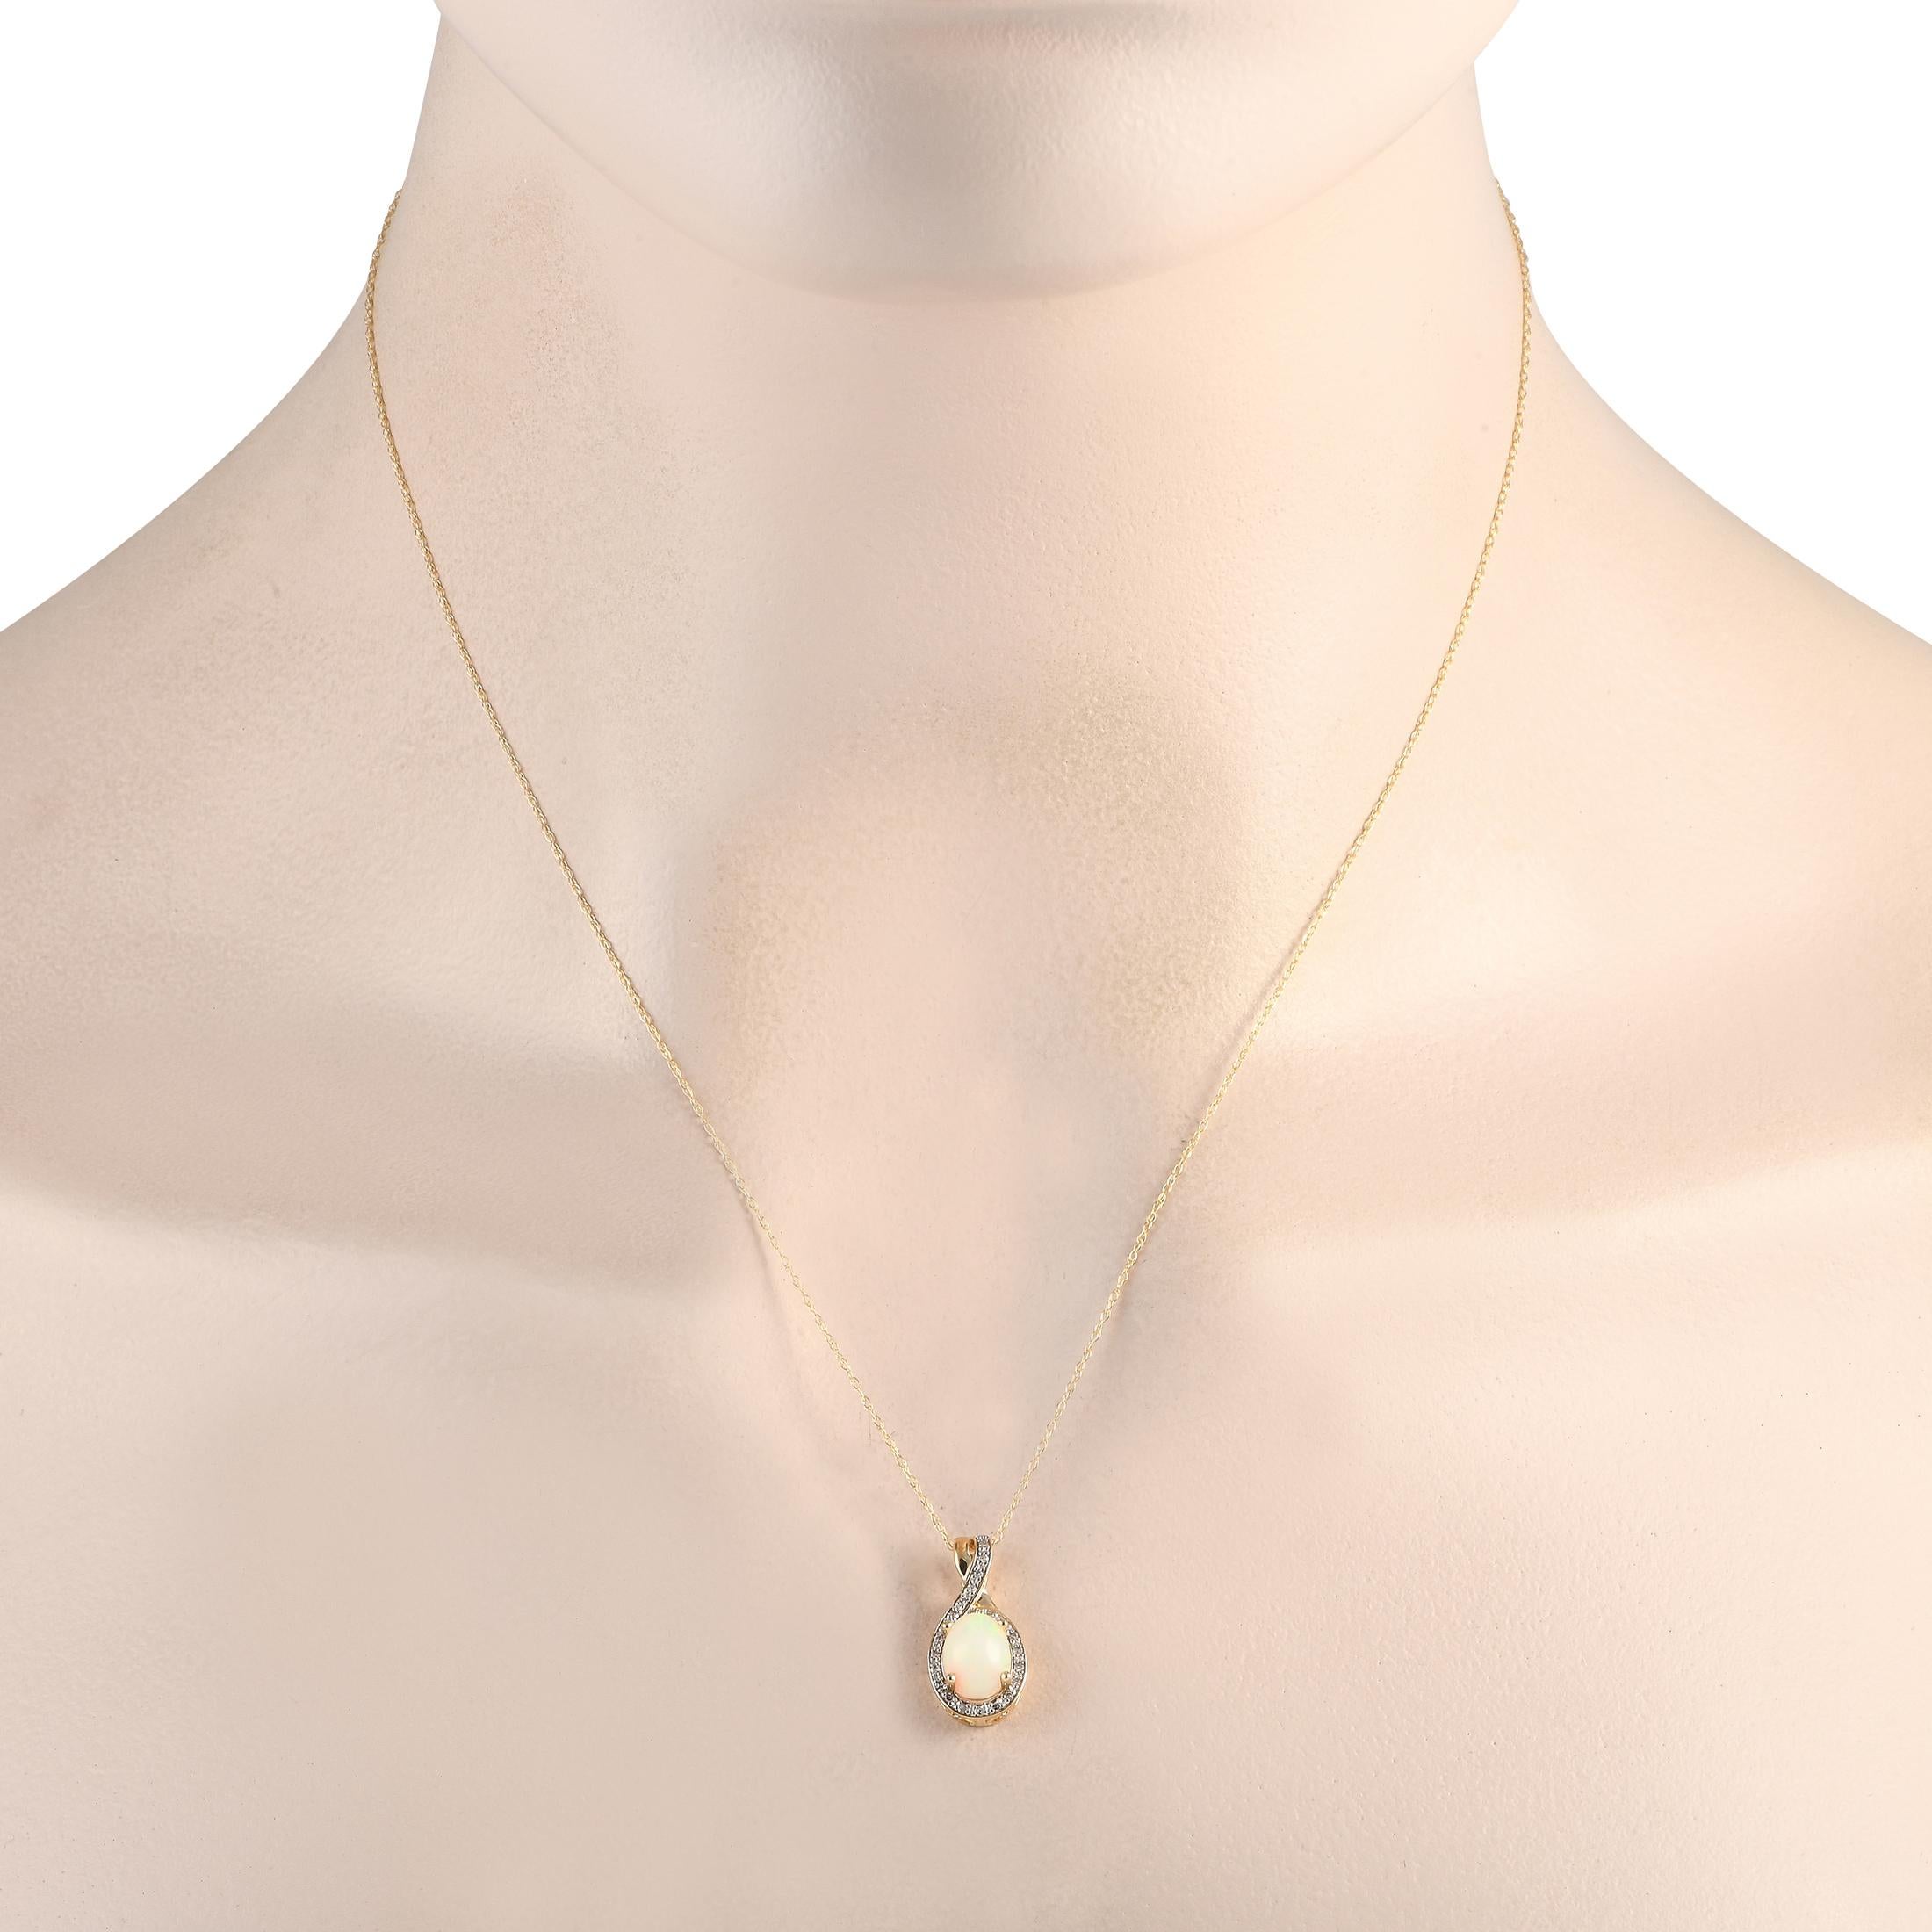 A radiant Opal gemstone shines to life on this exquisite necklace. This pieces stylish pendant features a 14K Yellow Gold setting that measures 0.75 long by 0.45 wide. Its suspended from an 18 chain and includes inset Diamond accents totaling 0.11